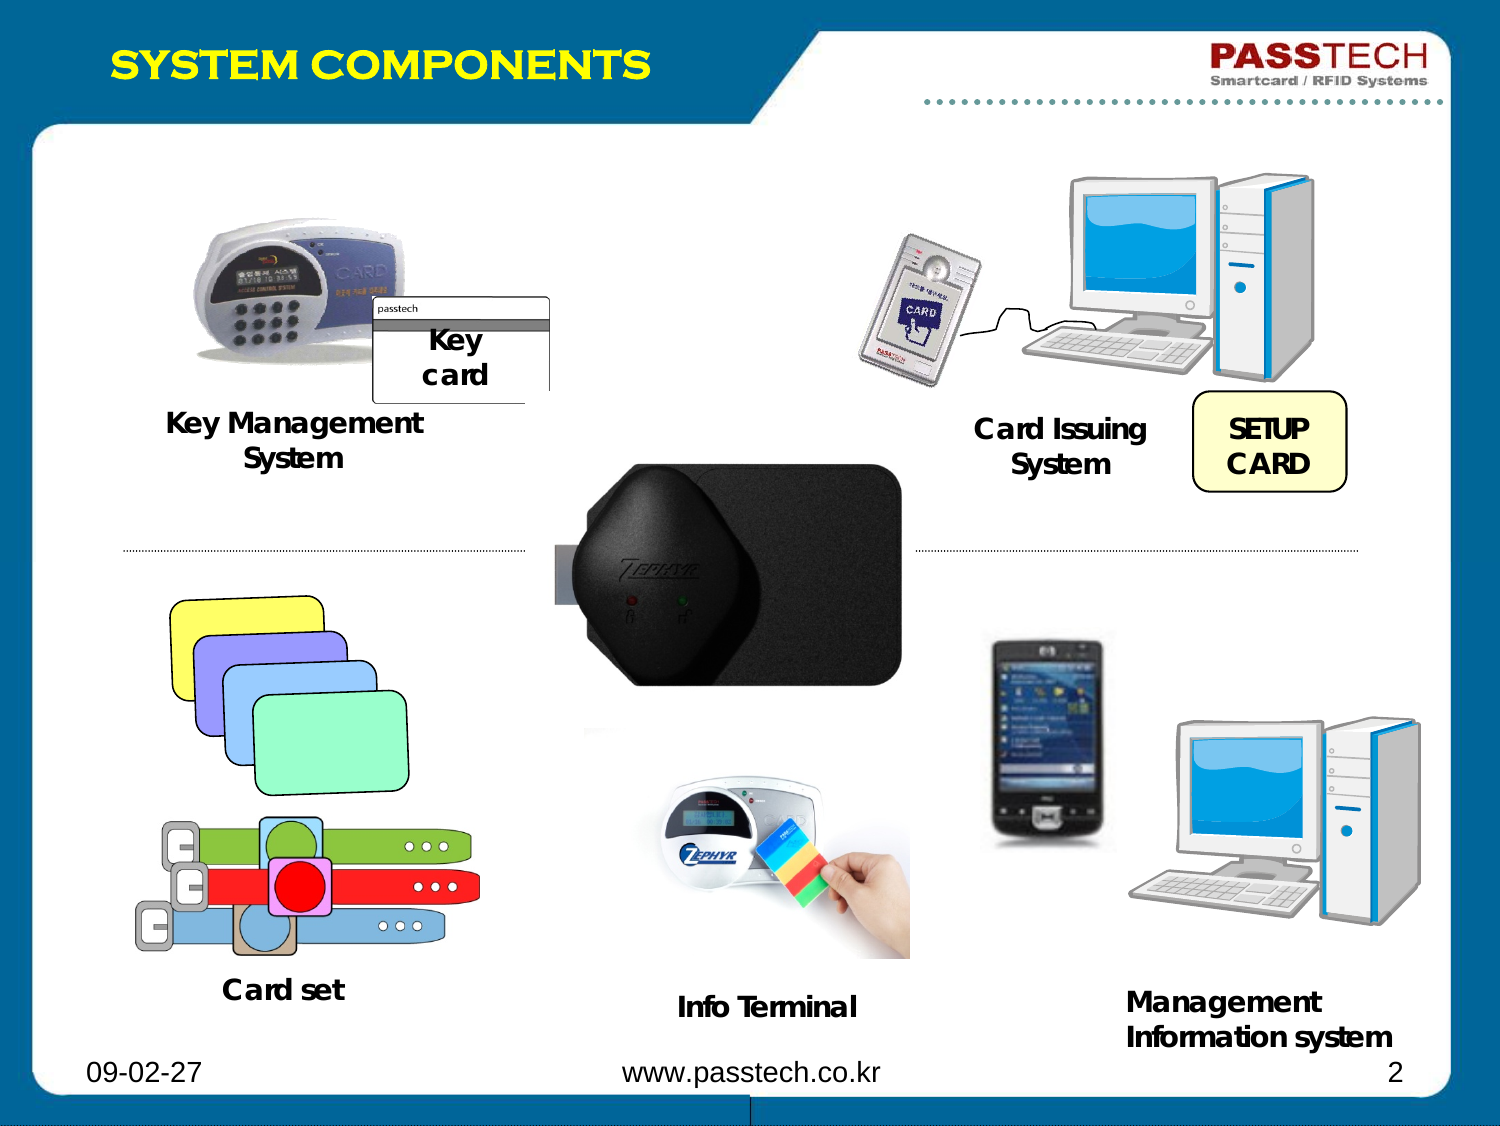 09-02-27 www.passtech.co.kr 2Key cardSETUP CARDKey Management SystemCard set Info Terminal Management Information systemCard Issuing SystemSYSTEM COMPONENTS